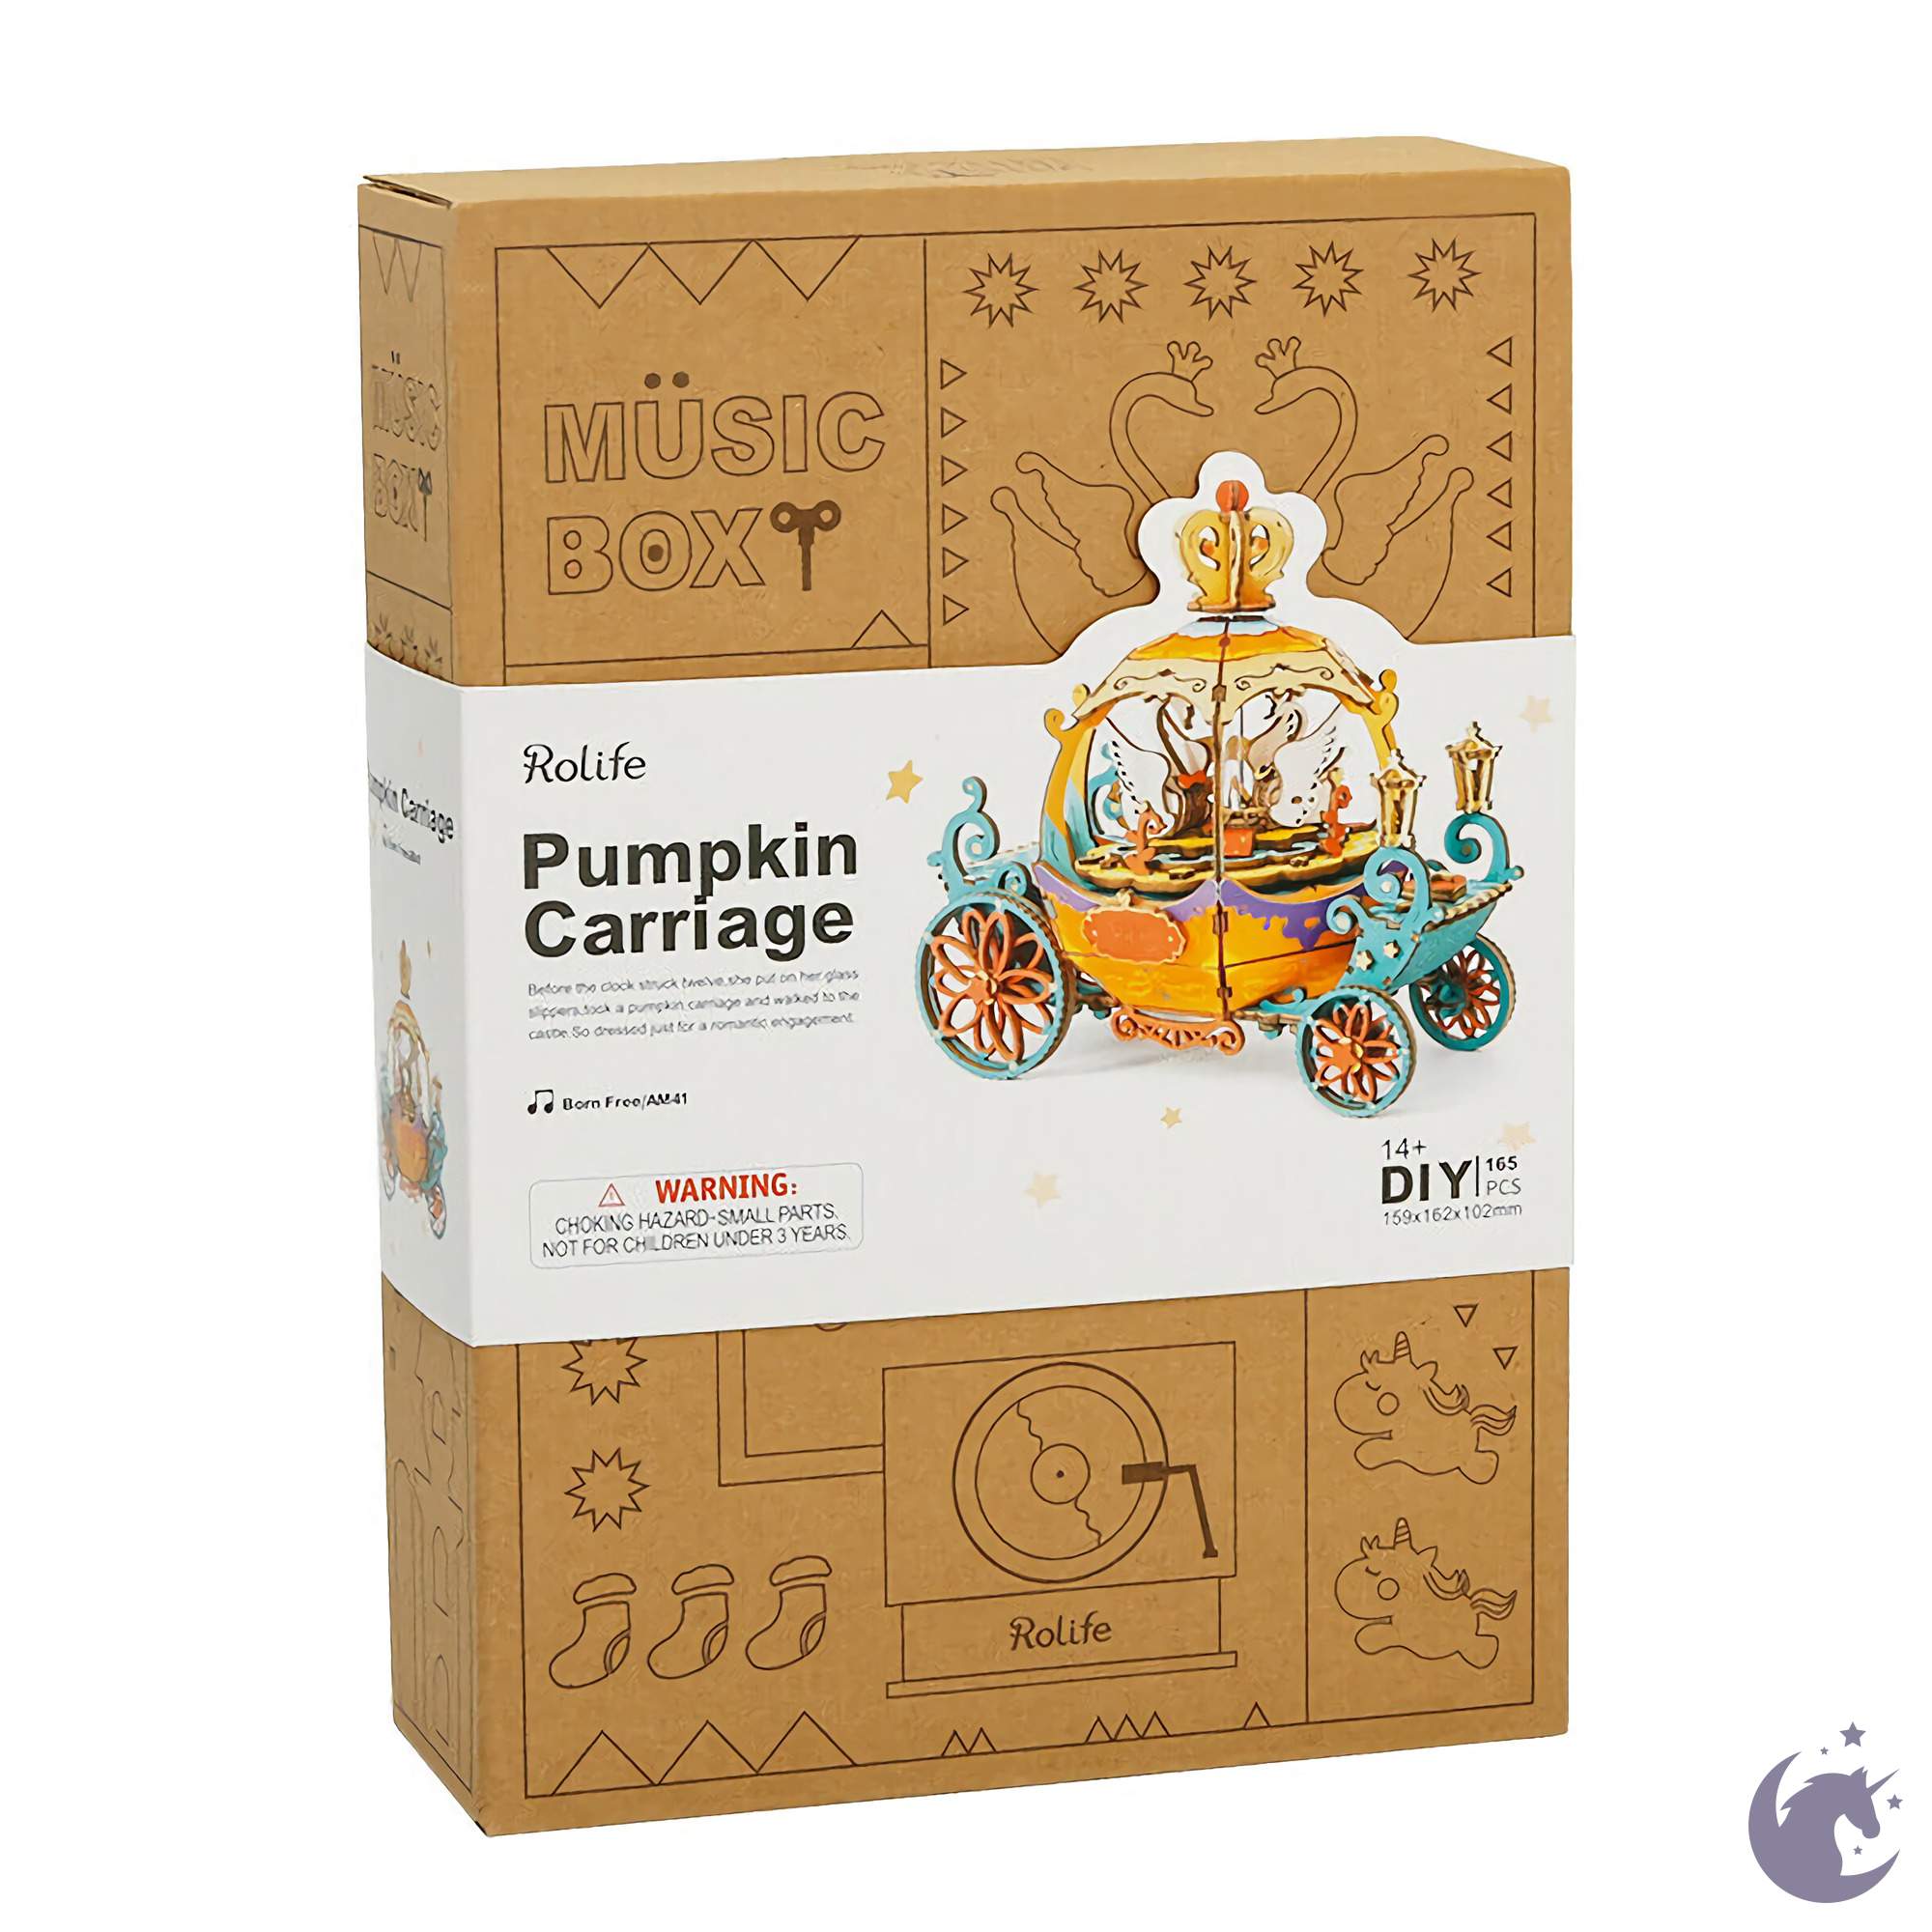 playwithunicorn_diy_robotime_am_41_pumpkin_carriage_educational_craft_kit_wooden_puzzle_toys_10_83880a37-79ee-458d-8ce3-2bb9c4bf2b04.jpg